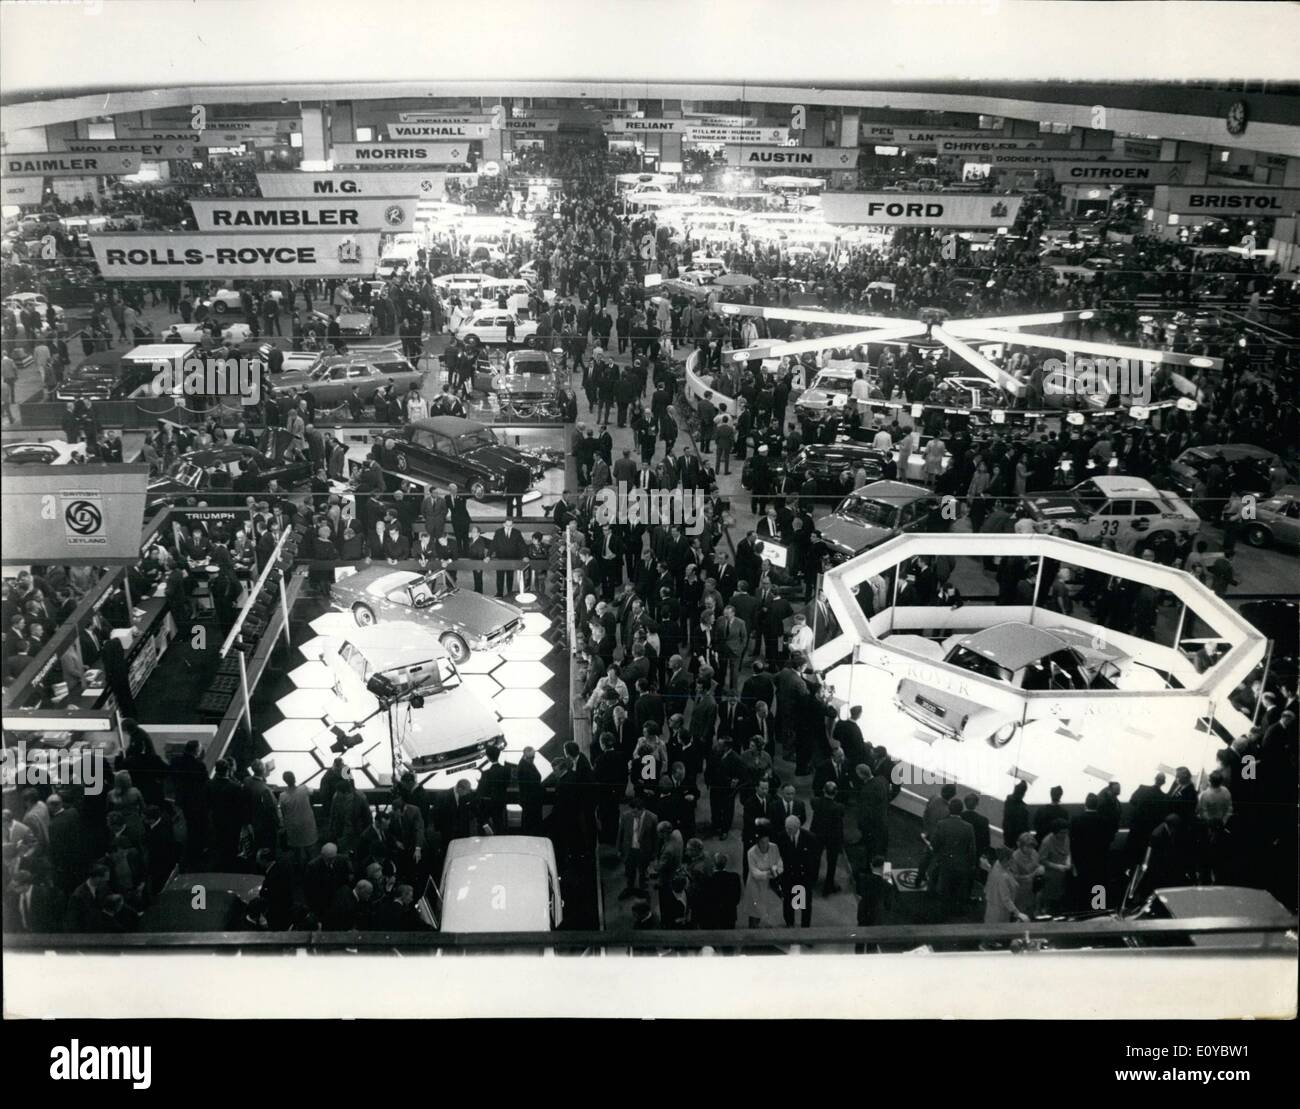 Oct. 10, 1969 - Opening Of The Motor Show: The 1969 Motor Show was opened at Earls Courts today by Sir Leslie O'Brien, G.B.E., Governor of the Bank of England. Photo Shows General of the Motor show at Earls Court, which was opened today. Stock Photo